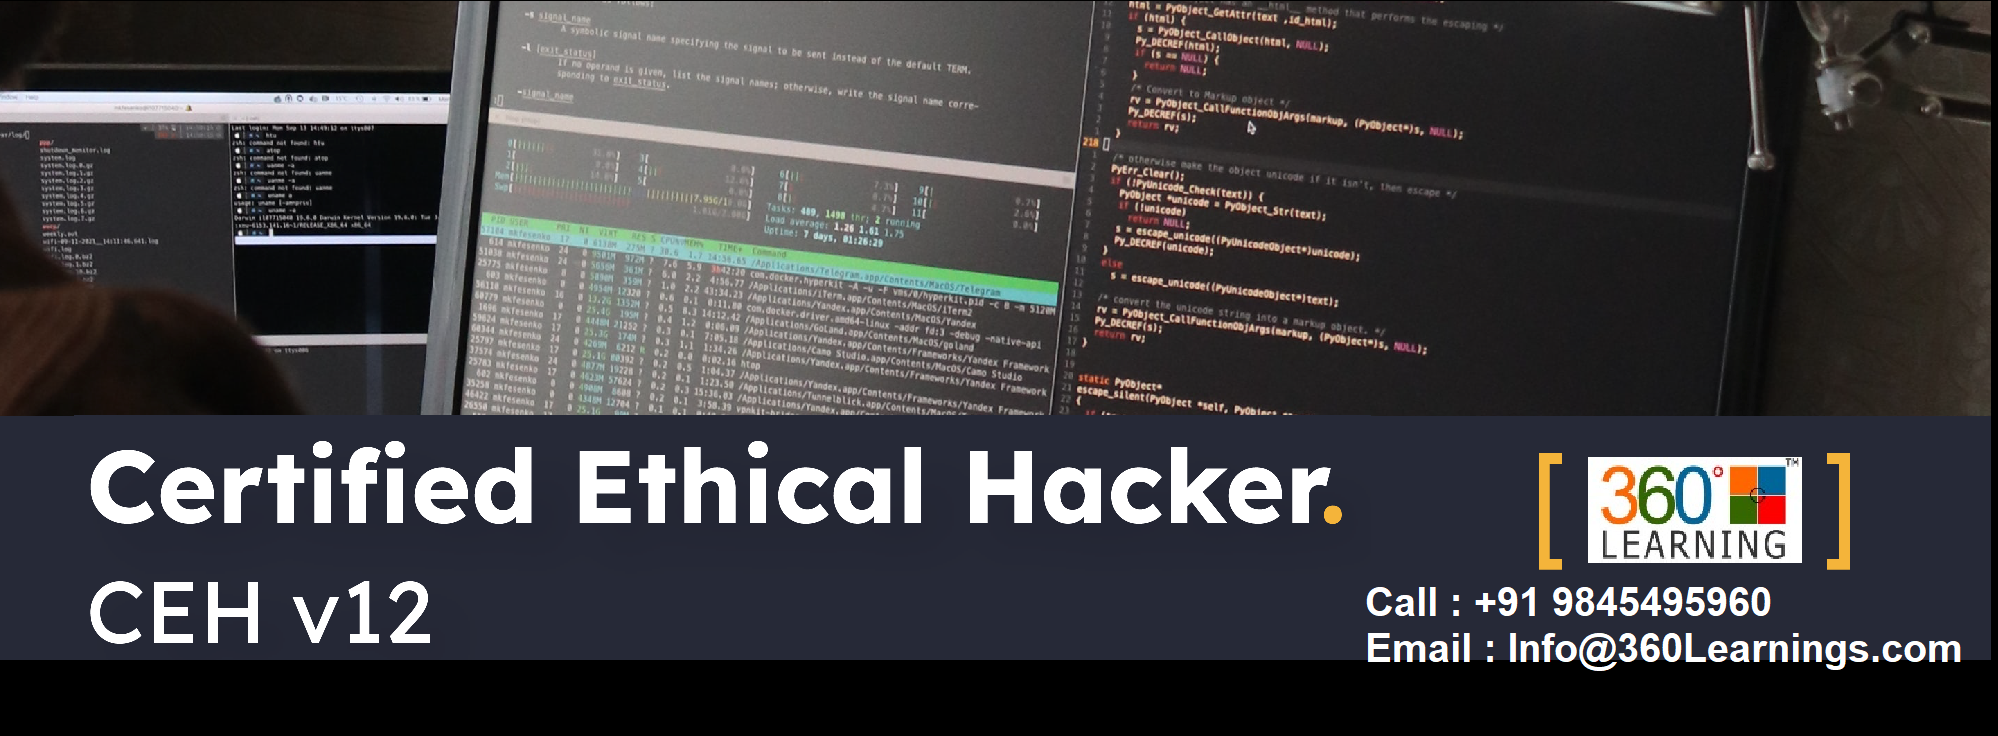 The Certified Ethical Hacker(CEH) v12 course is designed to give the student a foundational knowledge base and skillset to be